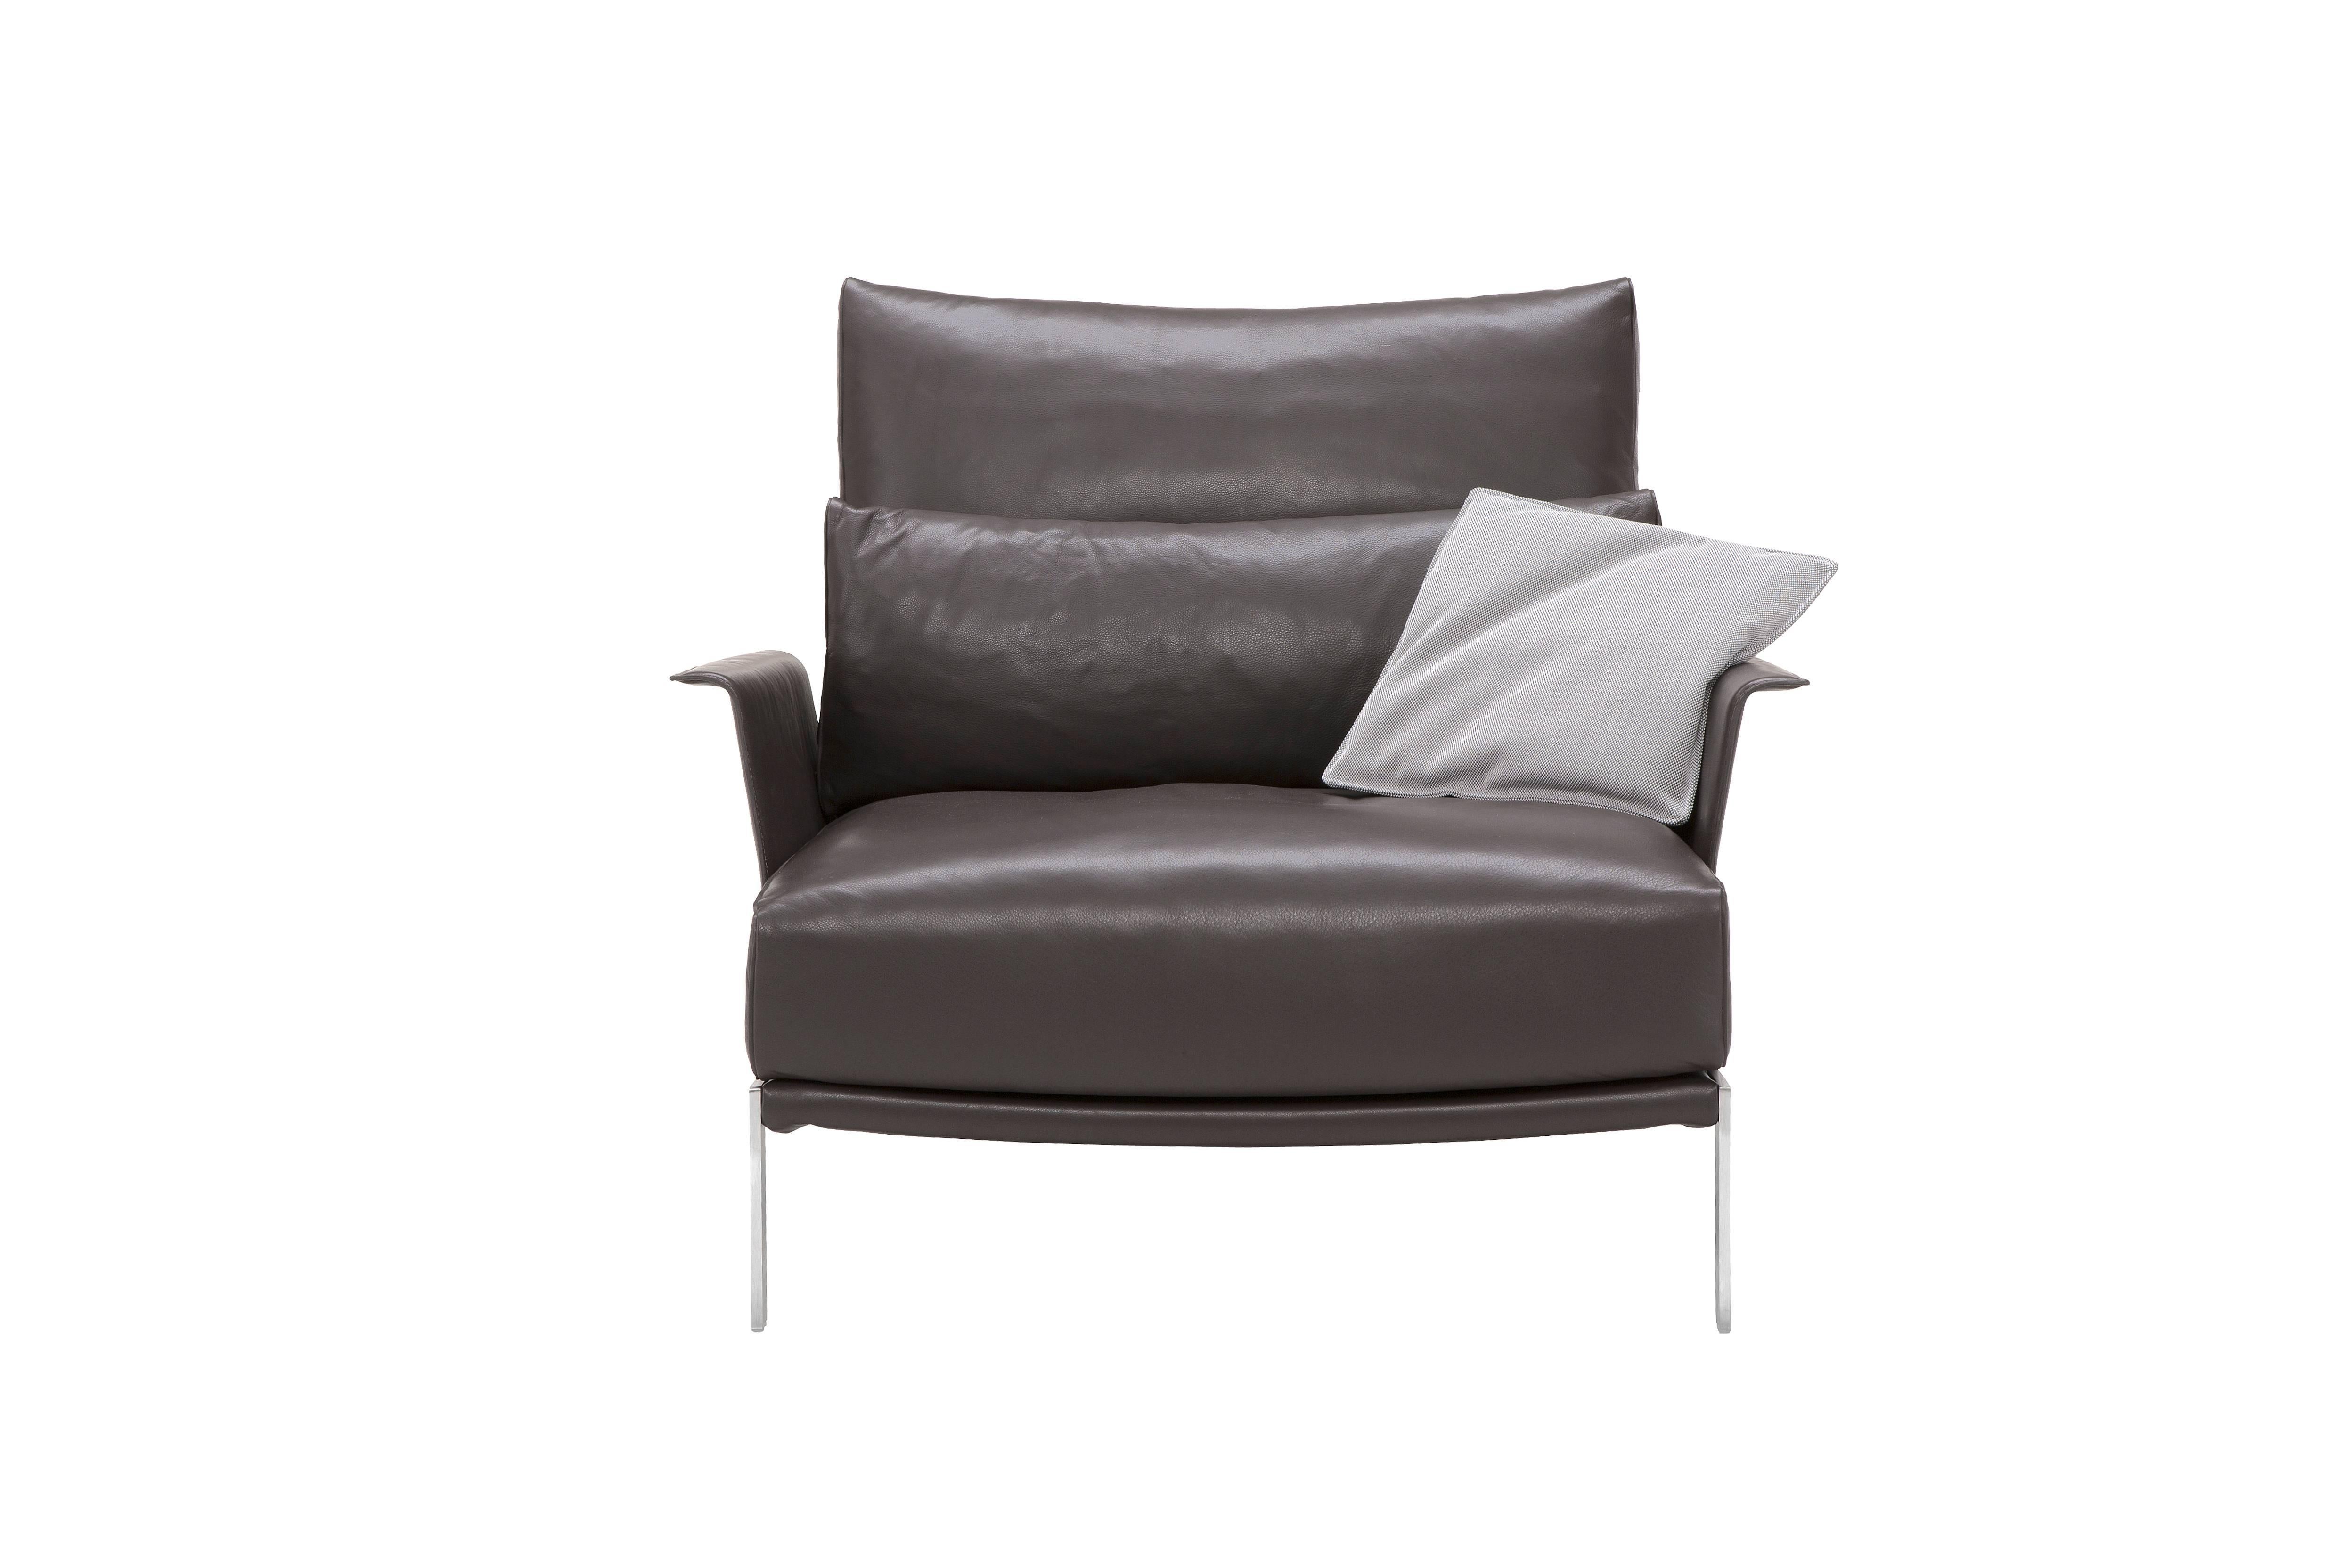 The link sofa, designed by Marconato & Zappa, demonstrates refined, modern lines. Genuine leather upholstery is available in several finishes. Back padded with goose down; seat in high density polyurethane and goose down; wood and metal internal